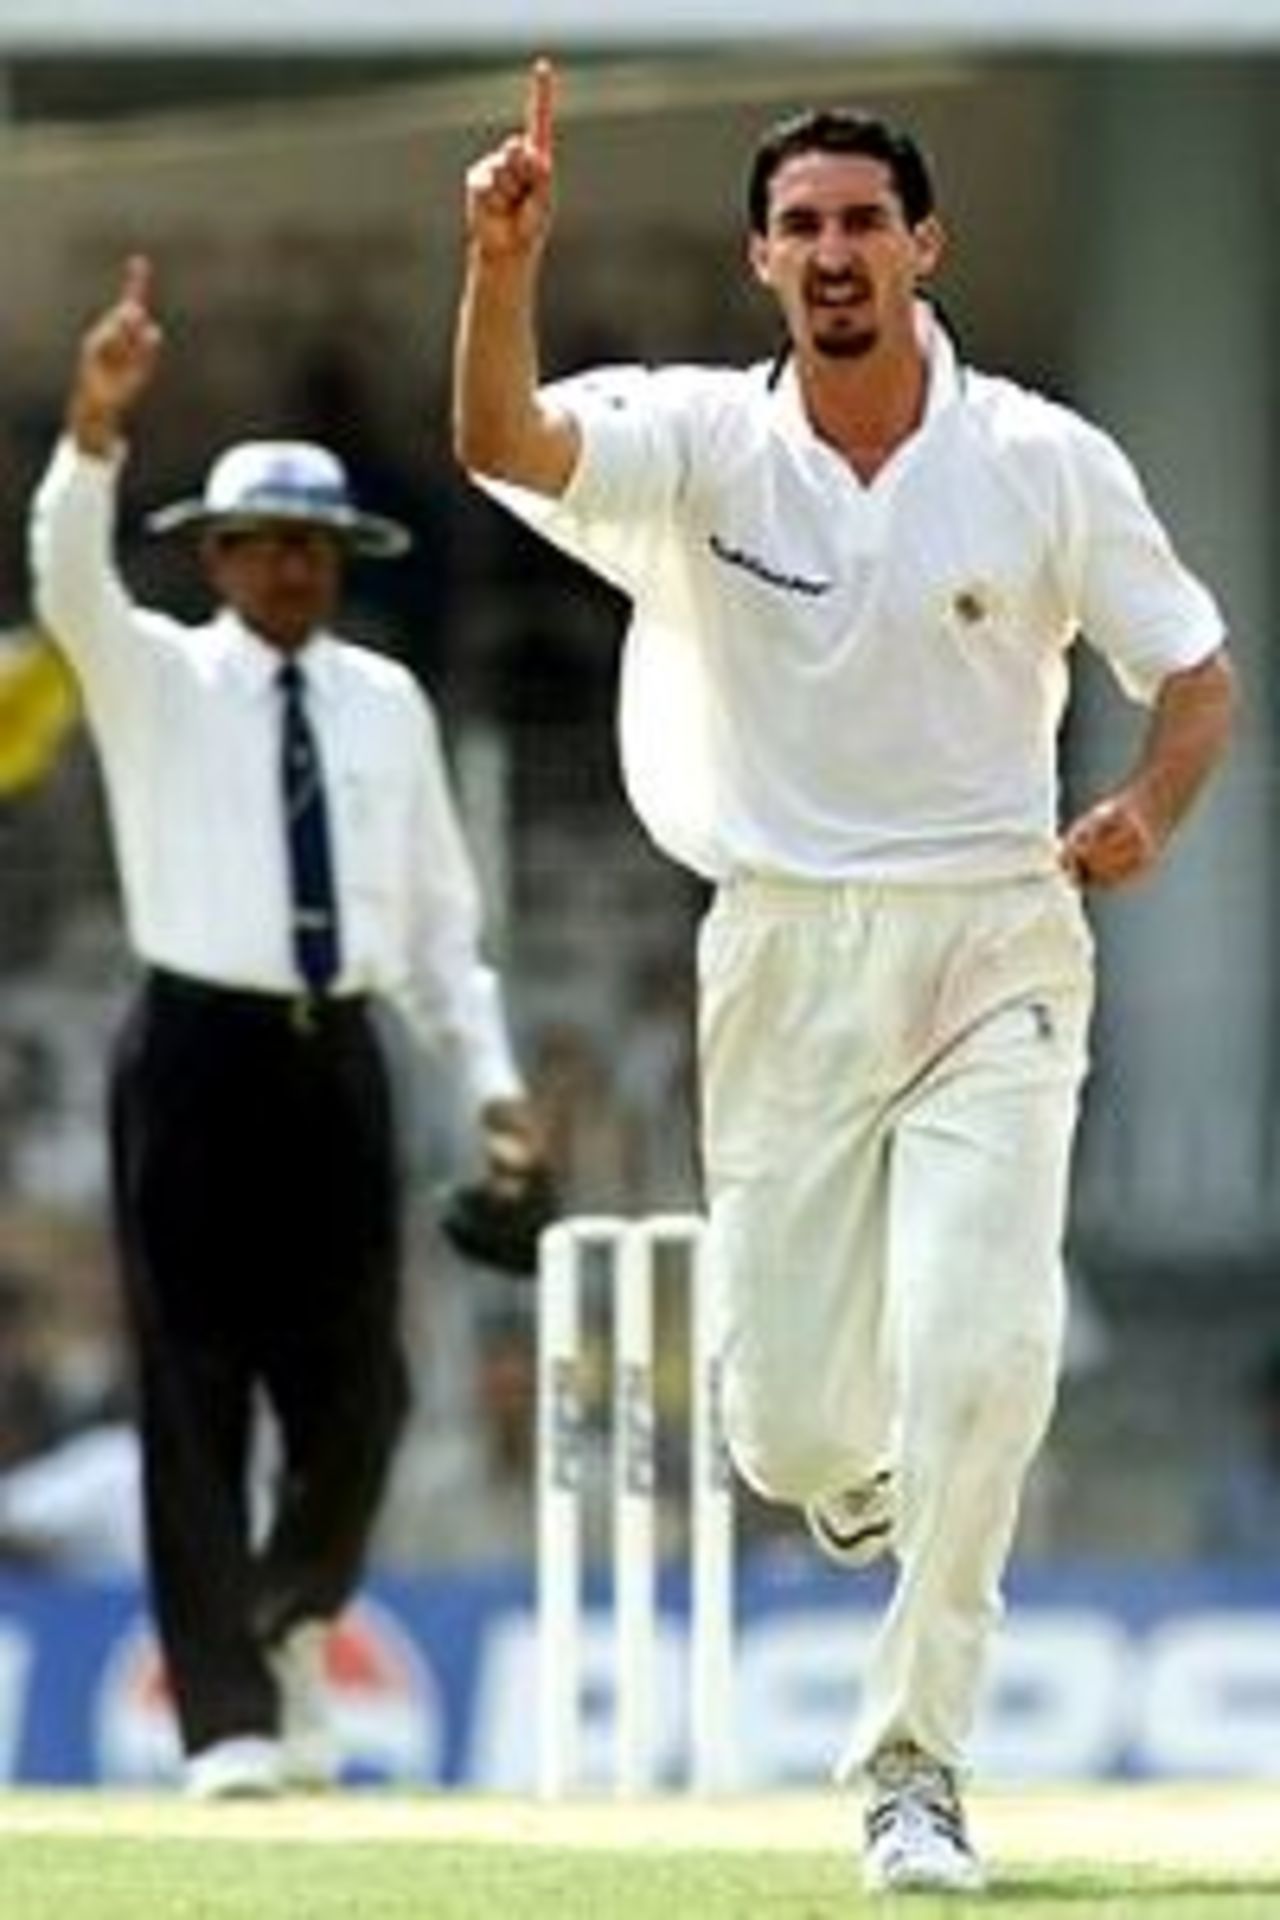 18 Feb 2001: Jason Gillespie of Australia celebrates after taking the wicket of Sadagoppan Ramesh of India A, during day two of the three day tour match between India A and Australia played at Vidarbha Cricket Association Stadium, Nagpur, India.